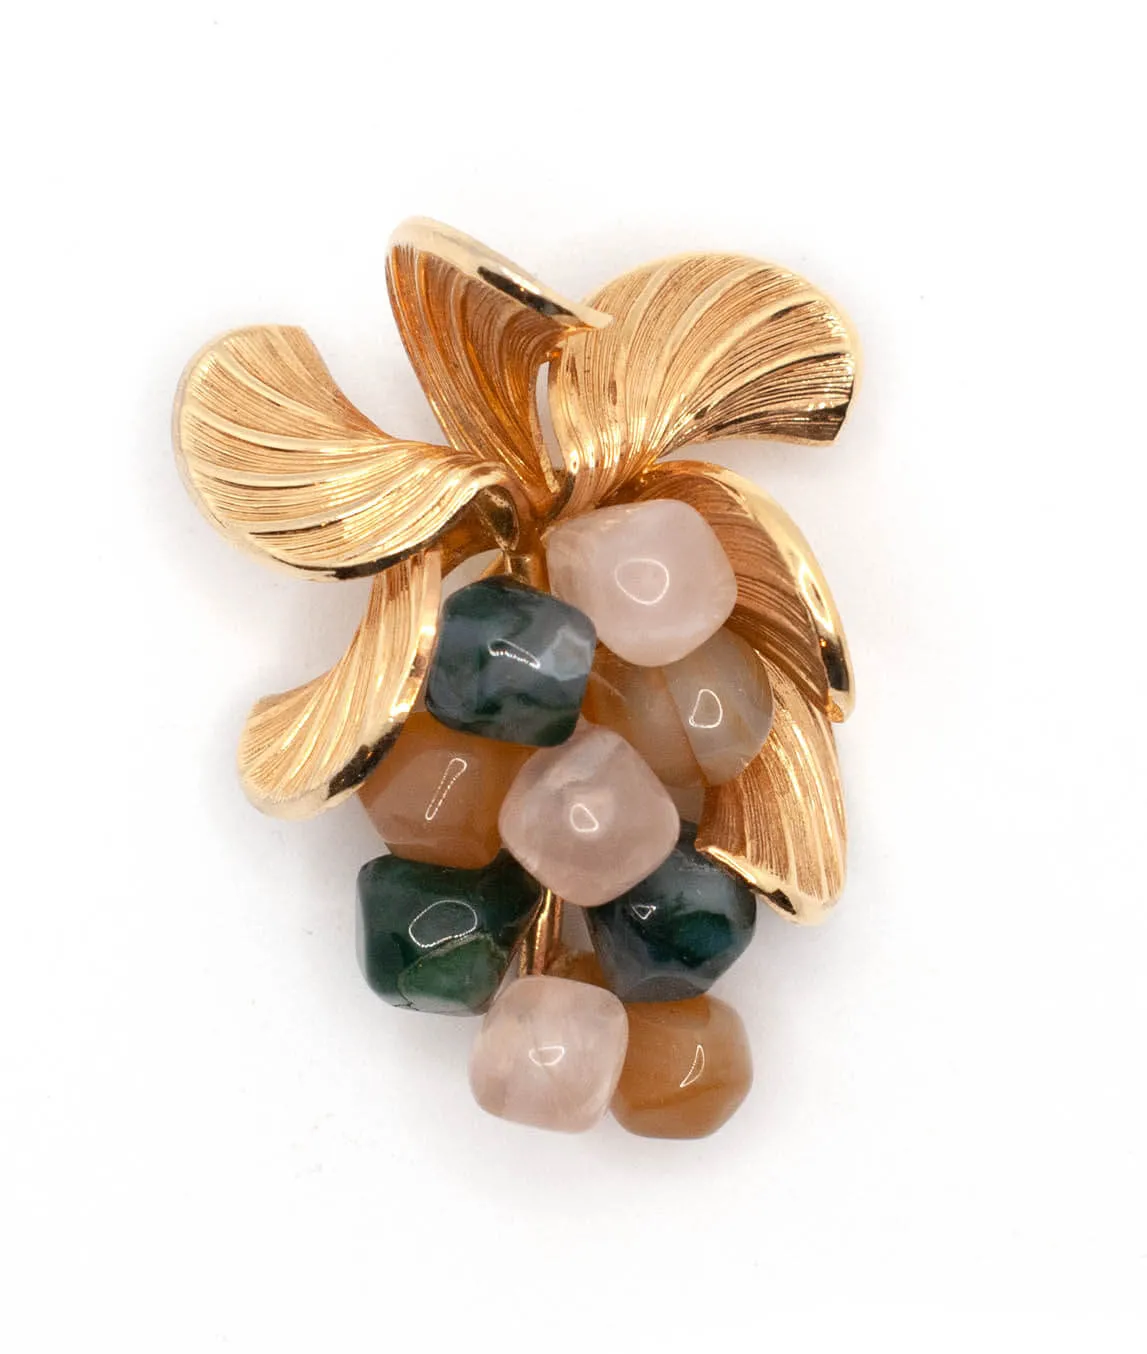 Vintage Grape Brooch by Henkel & Grossé in rose quartz and gold finish